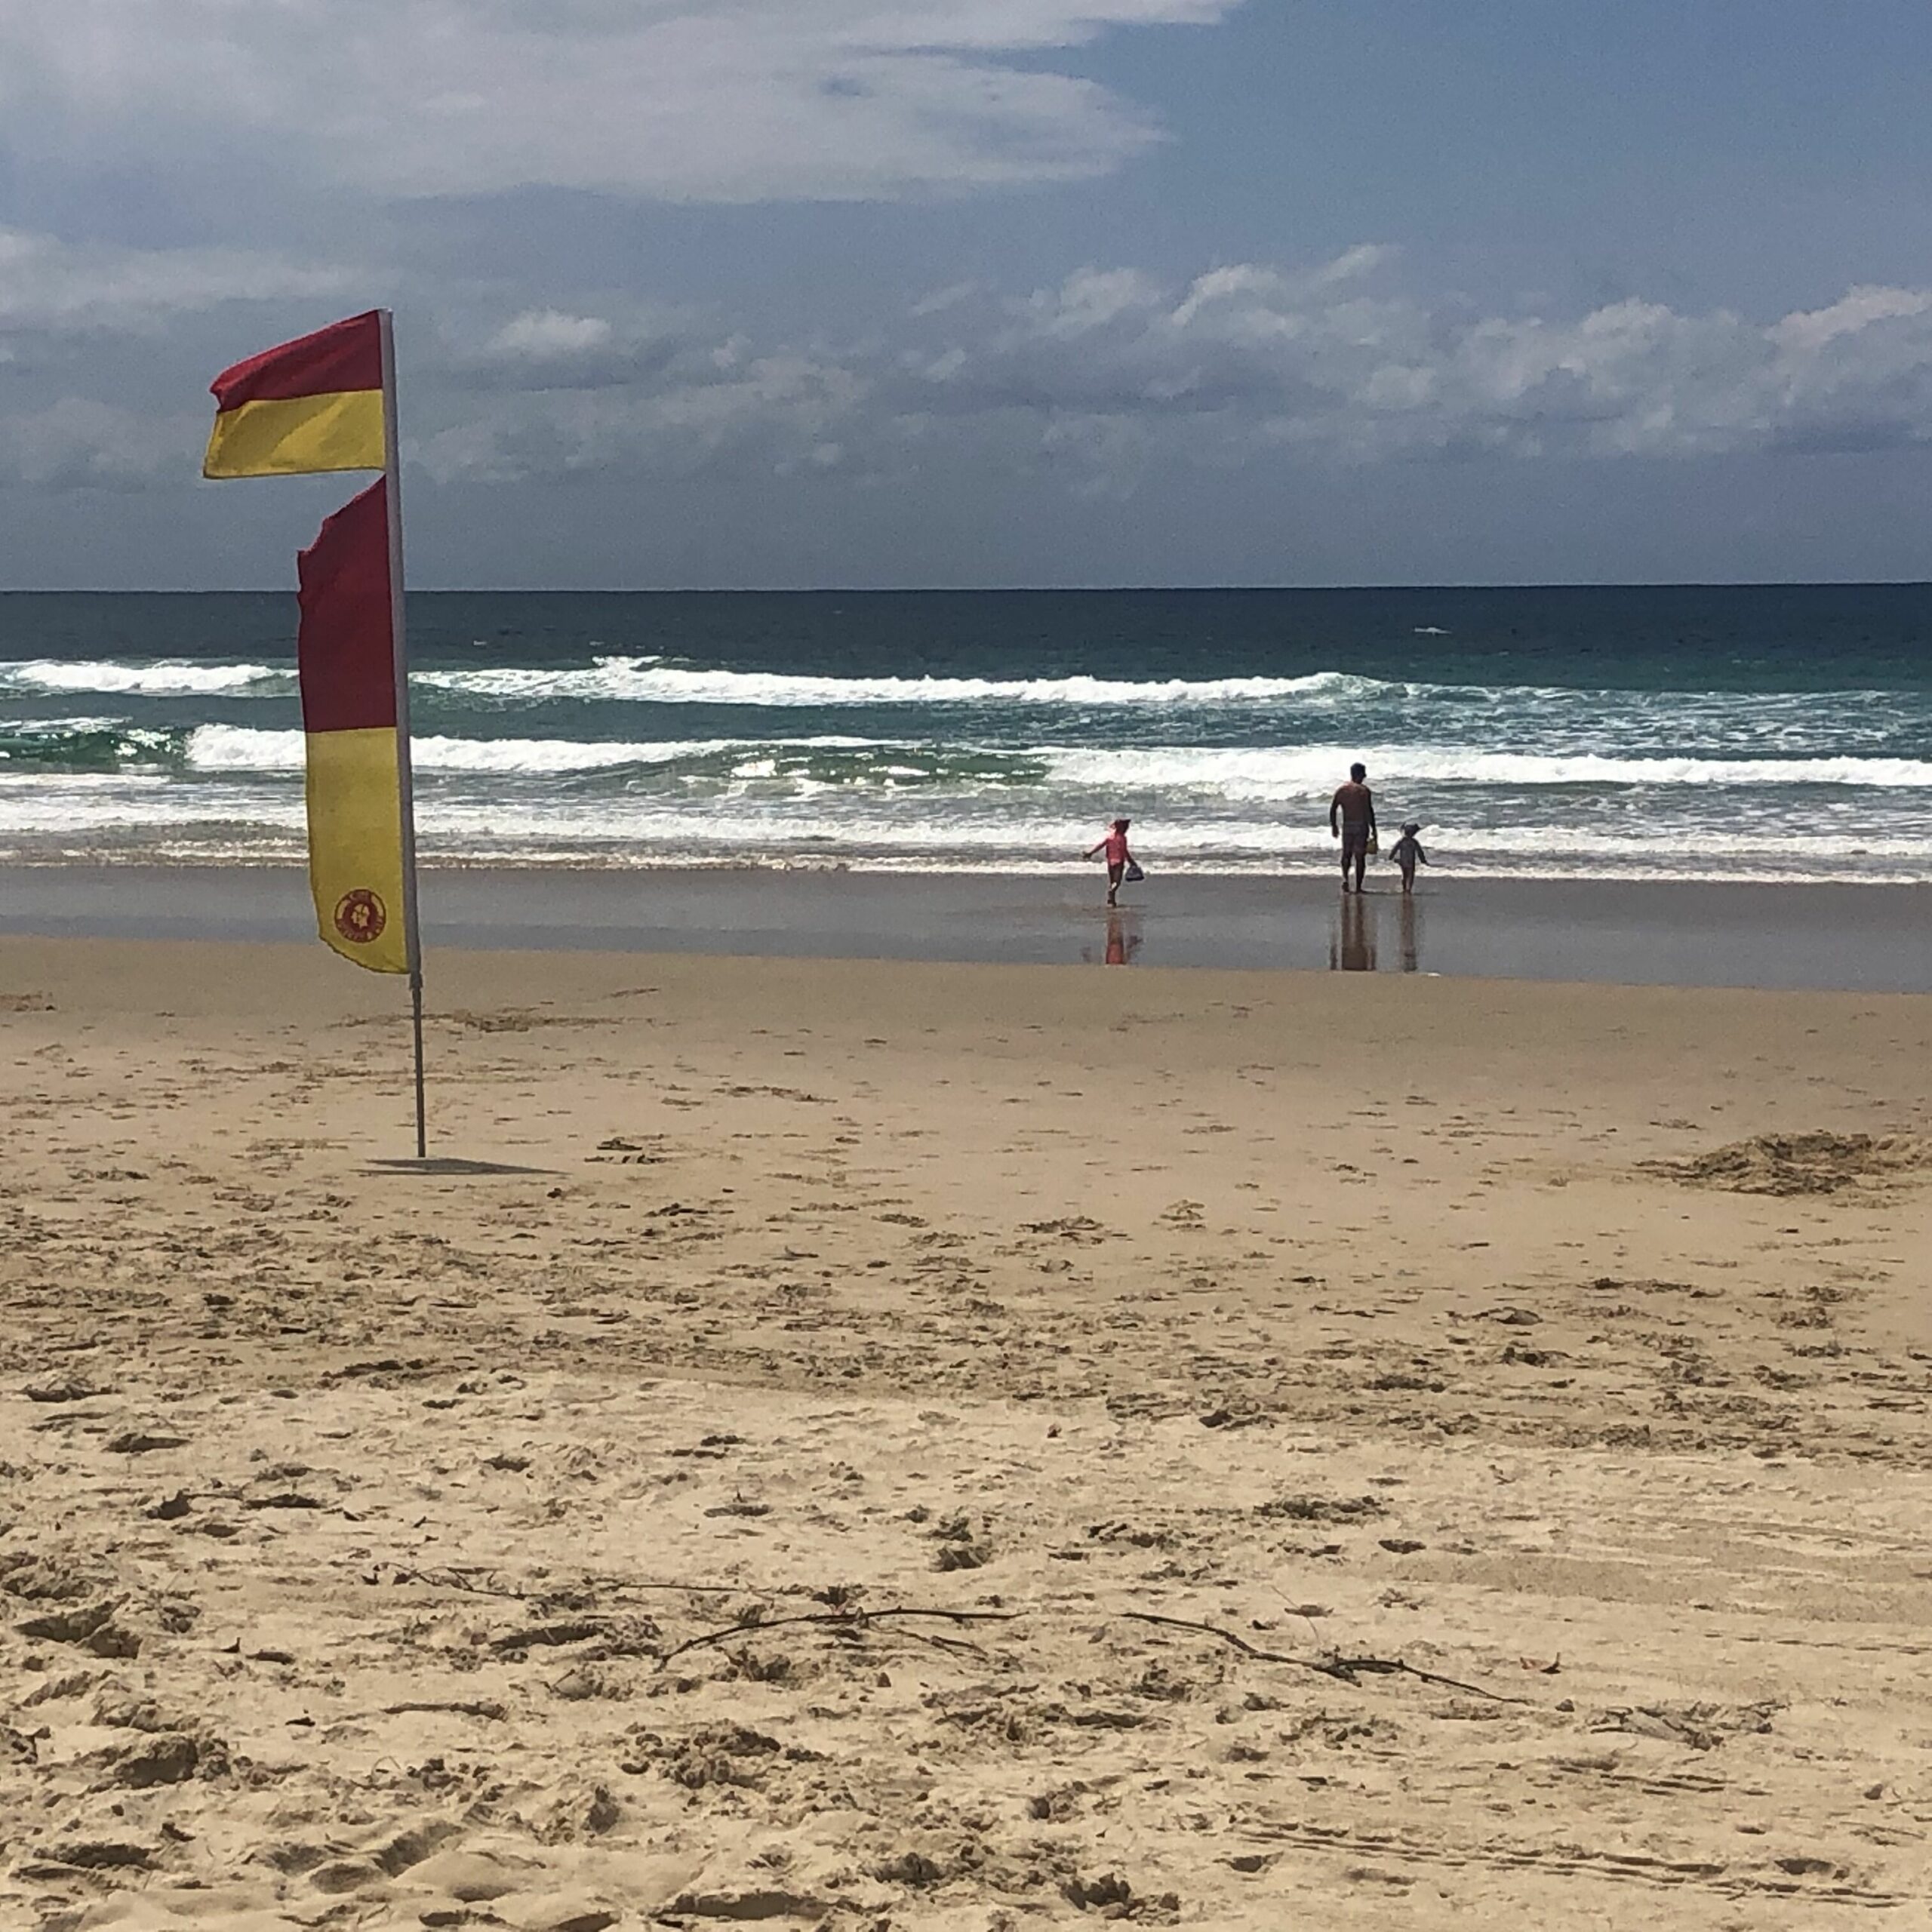 Beach Front Luxury Apartment at Cotton Tree, Maroochydore